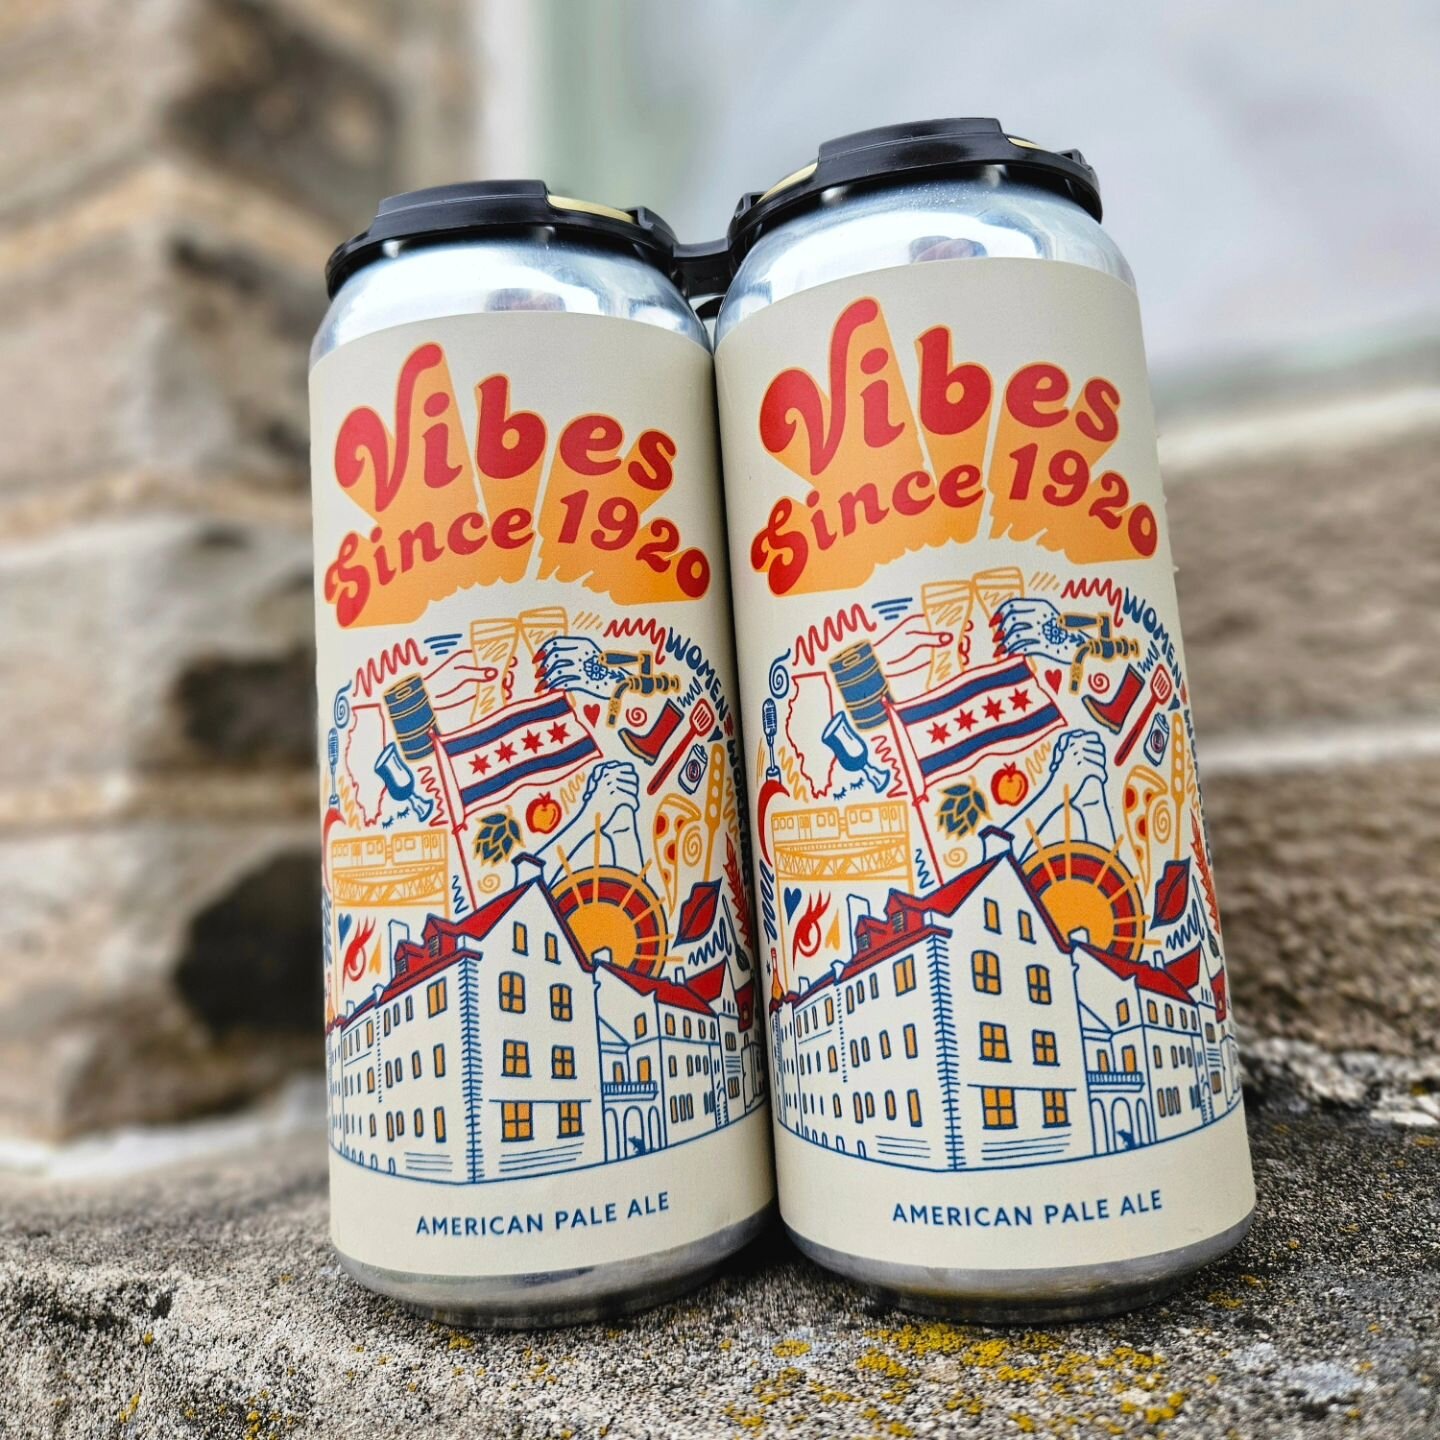 Last month, the ladies of Sew Hop'd joined more than 100 women in the Chicagoland area to help participate in a special project that pays homage to the year women won the right to vote in America. Vibes Since 1920-American Pale Ale is now available i